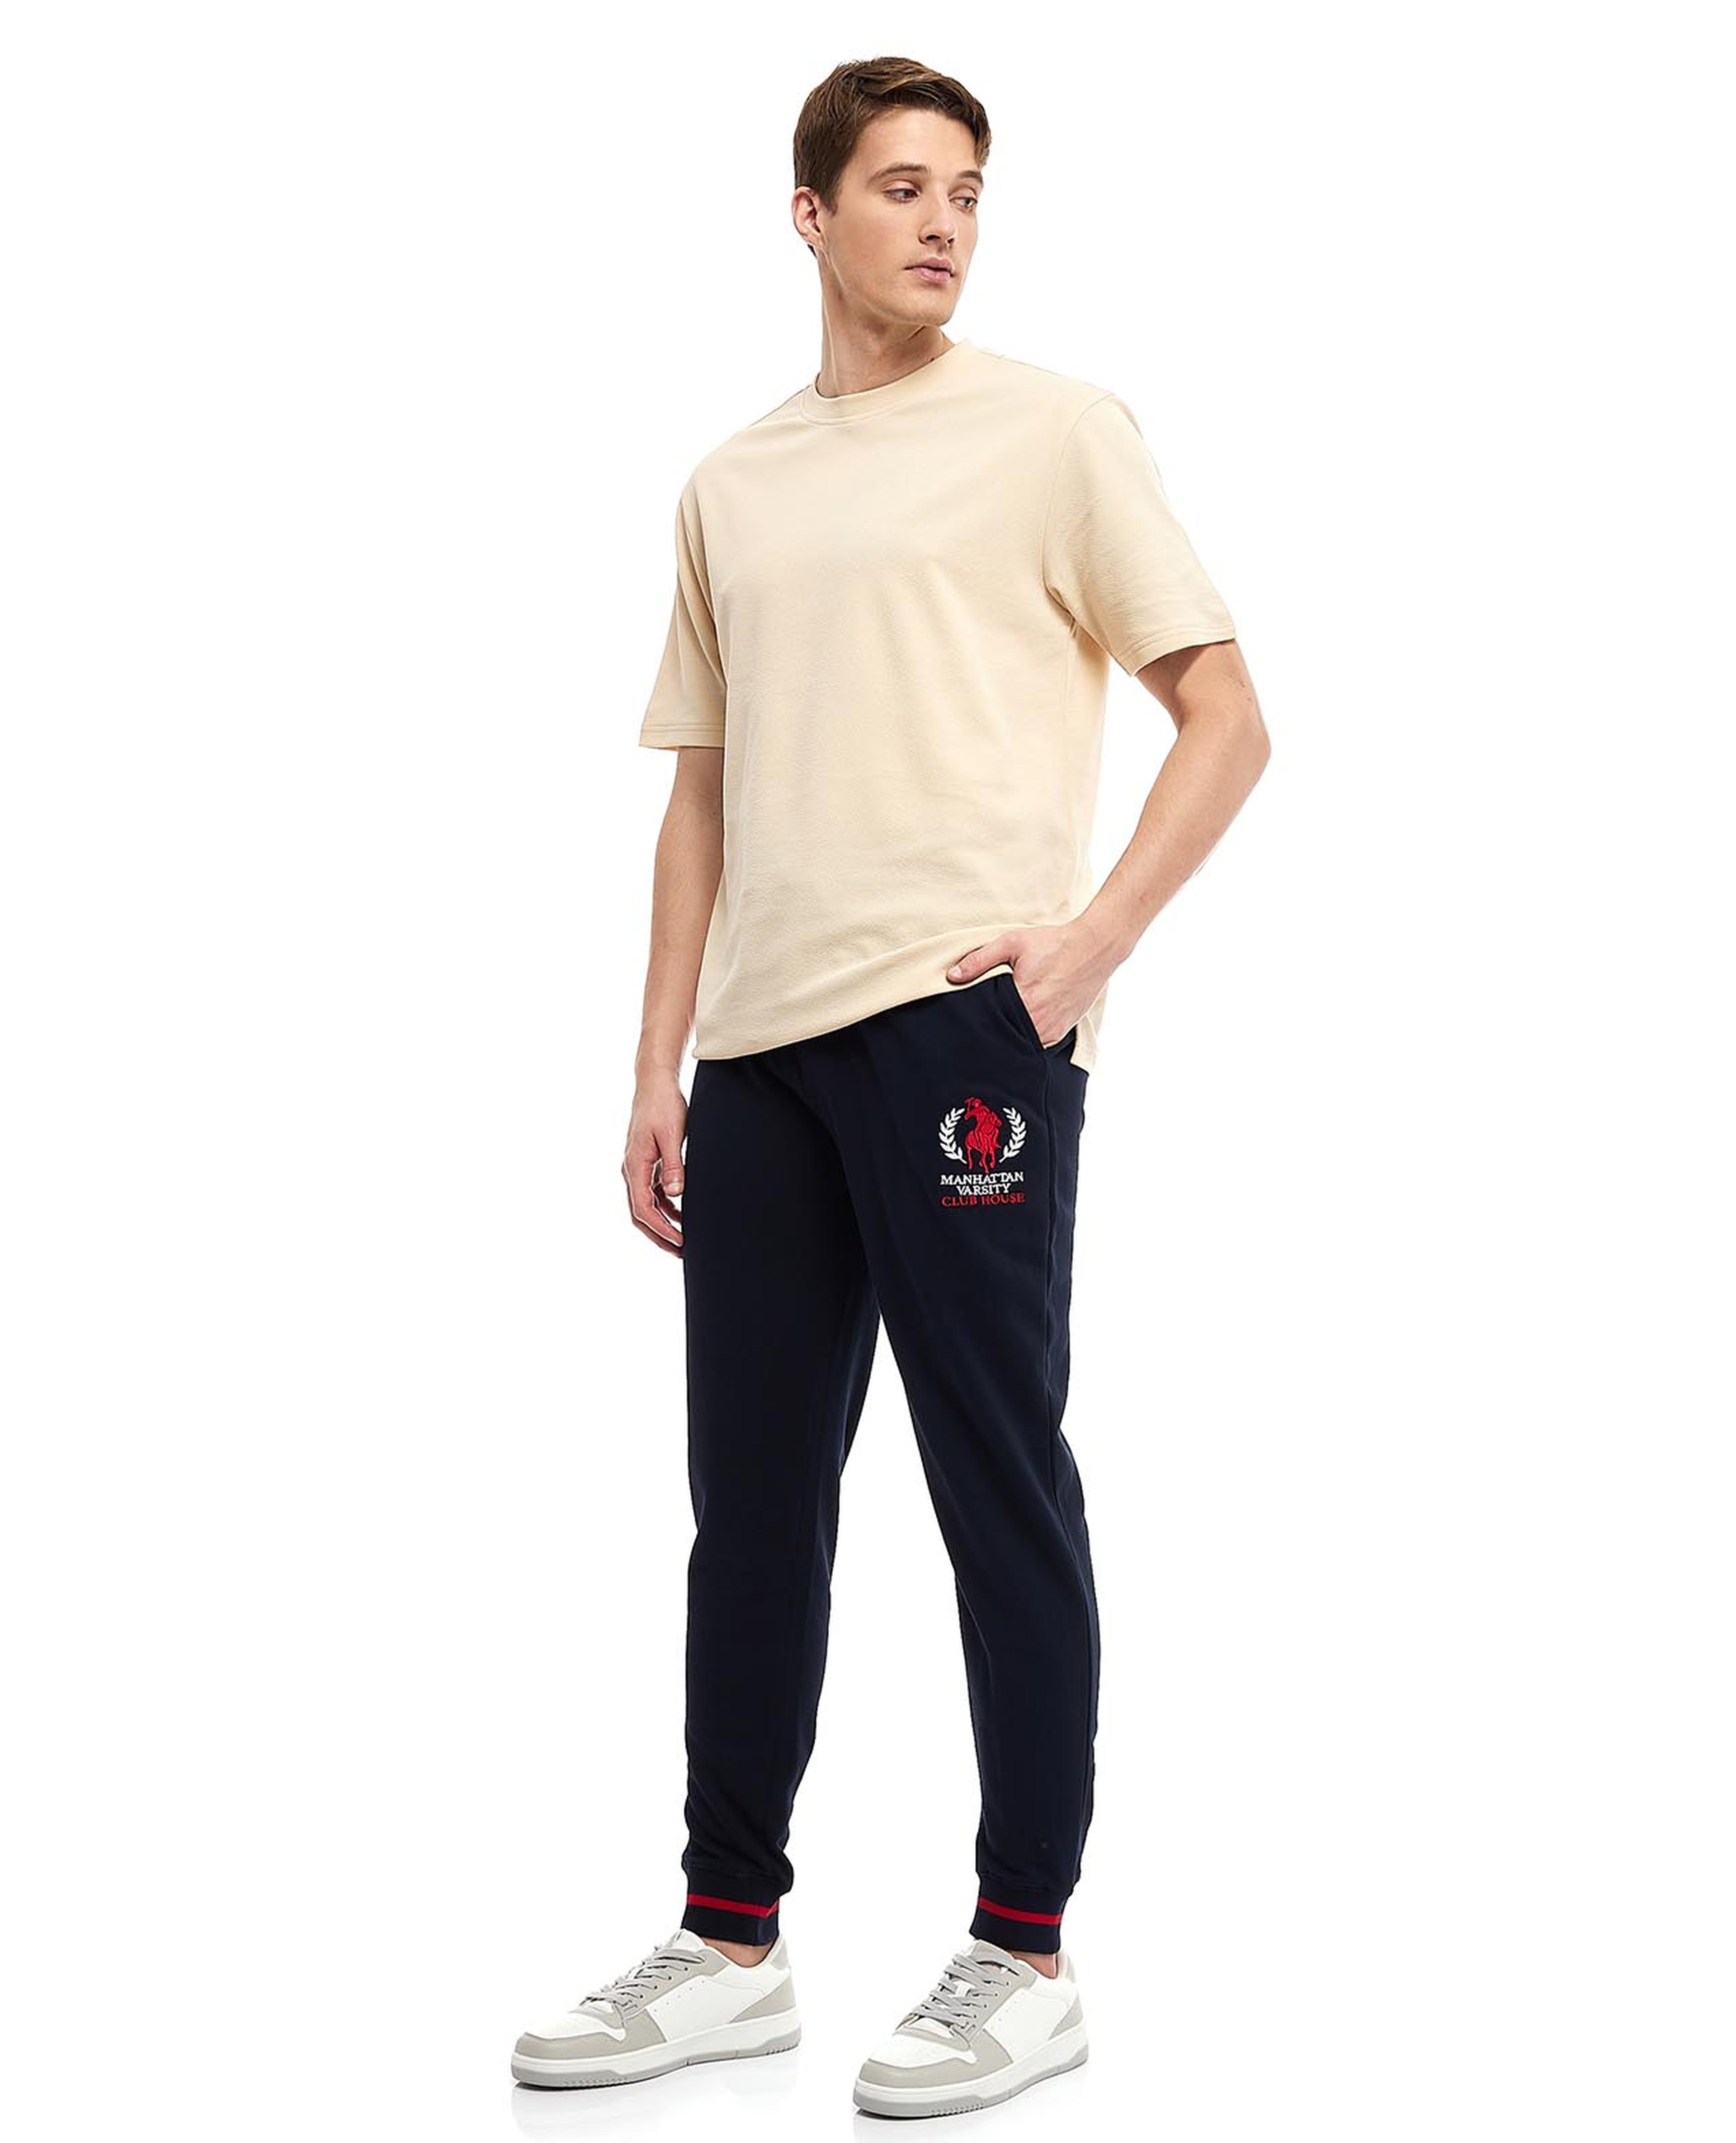 Buy Jogger Pants with Drawstring Waist Online at Best Prices in